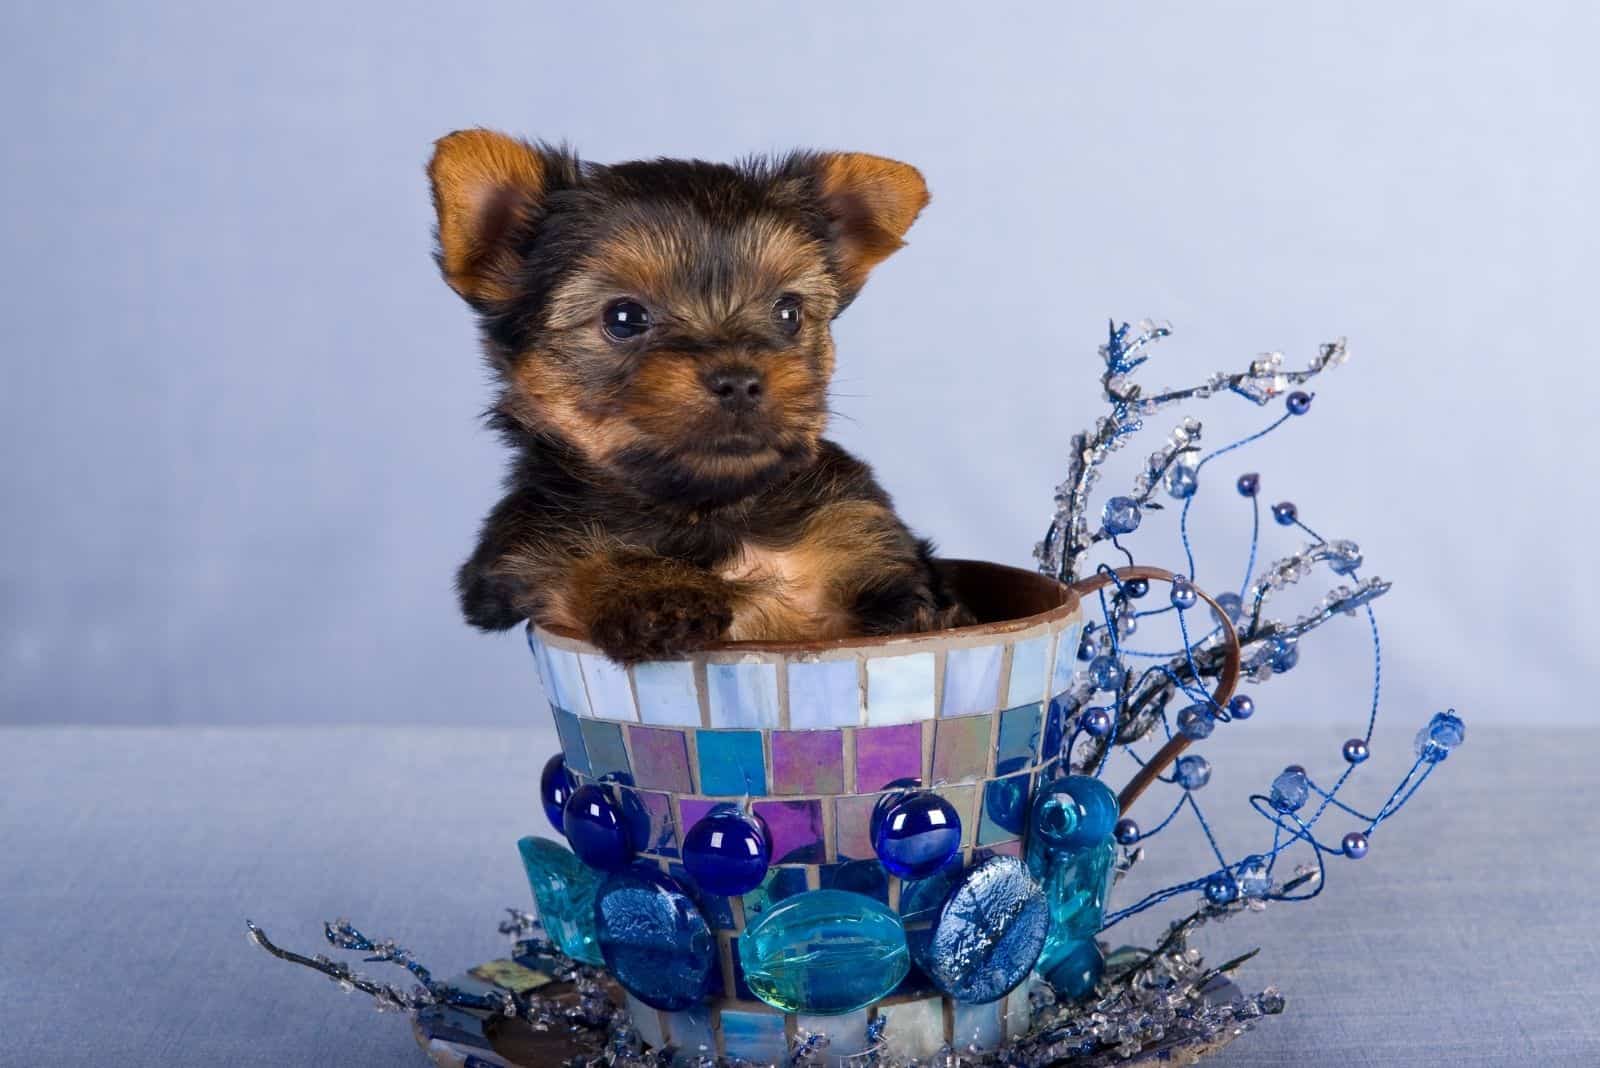 teacup yorkshire puppy inside a big teacup adorned with blue stones and twigs